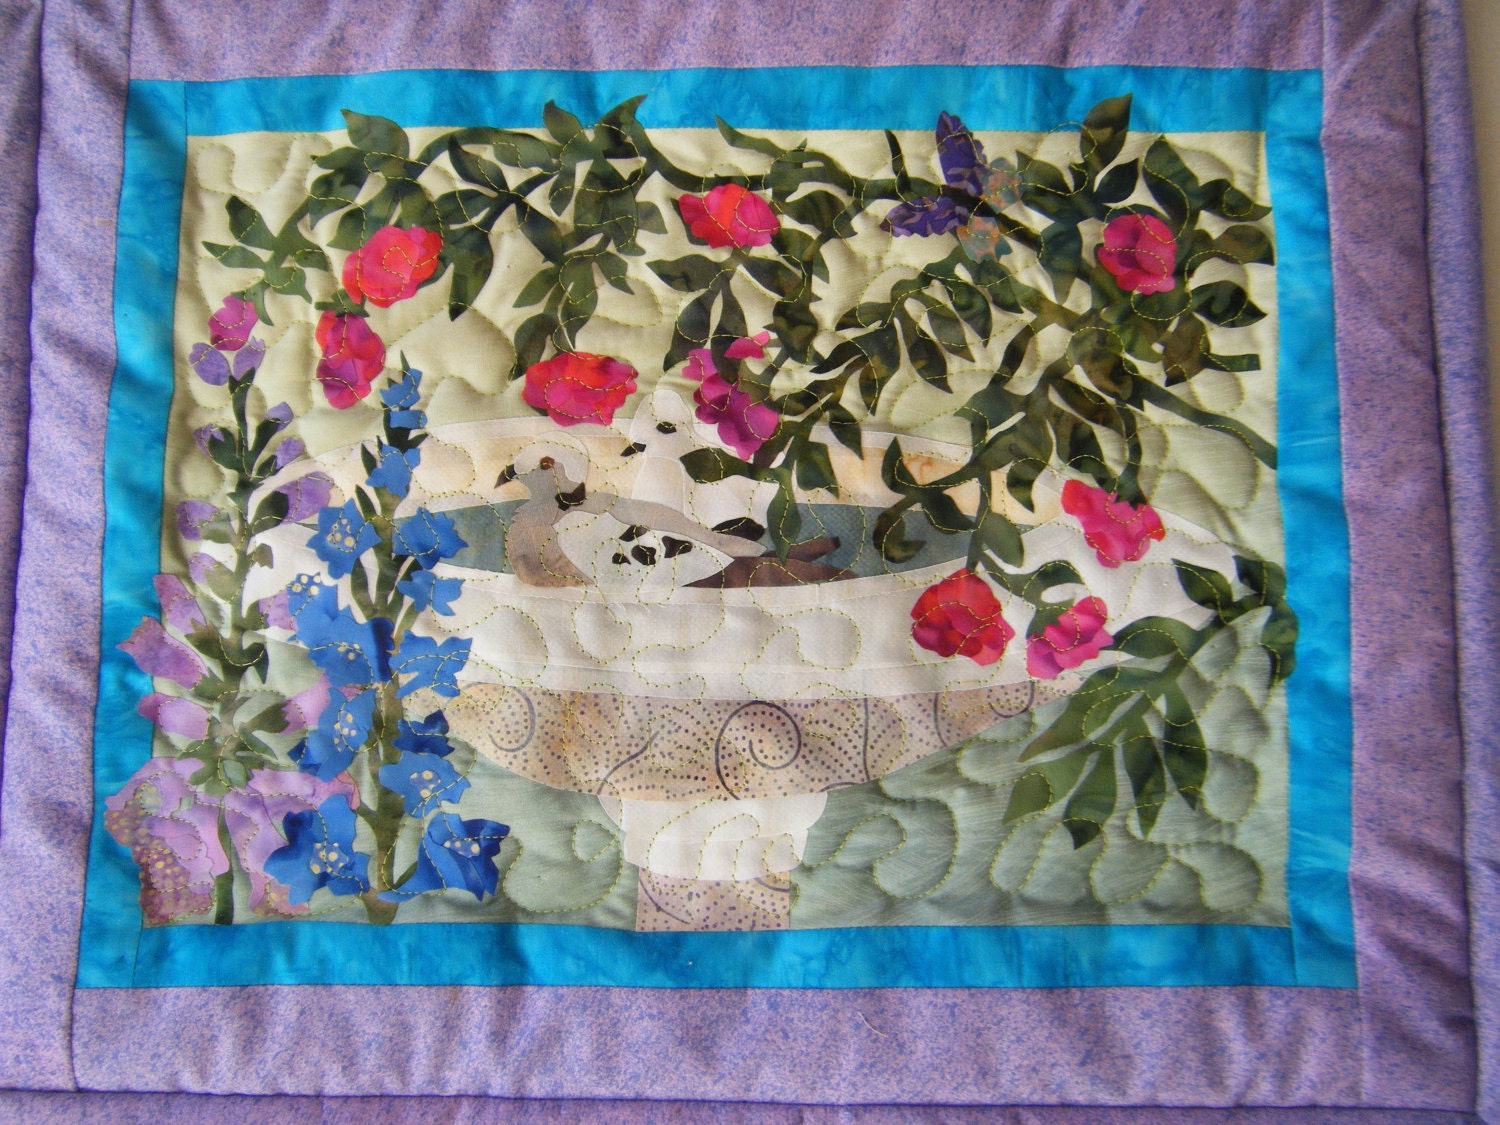 Two Doves in a Birdbath - Quilted Wall Hanging - HANDMADE BY ME - KraftyGrannysHome